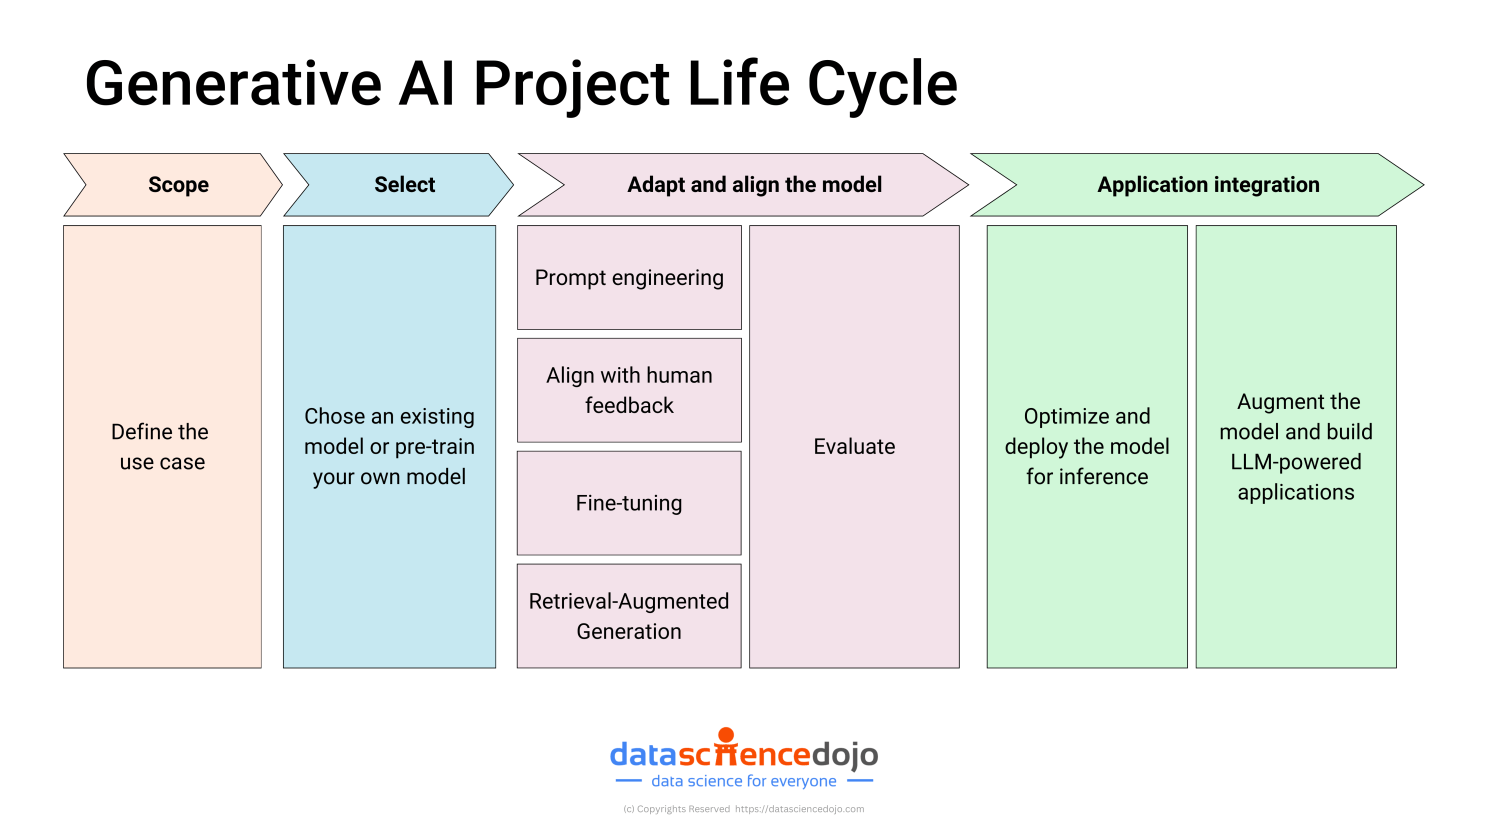 the process to build generative ai applications